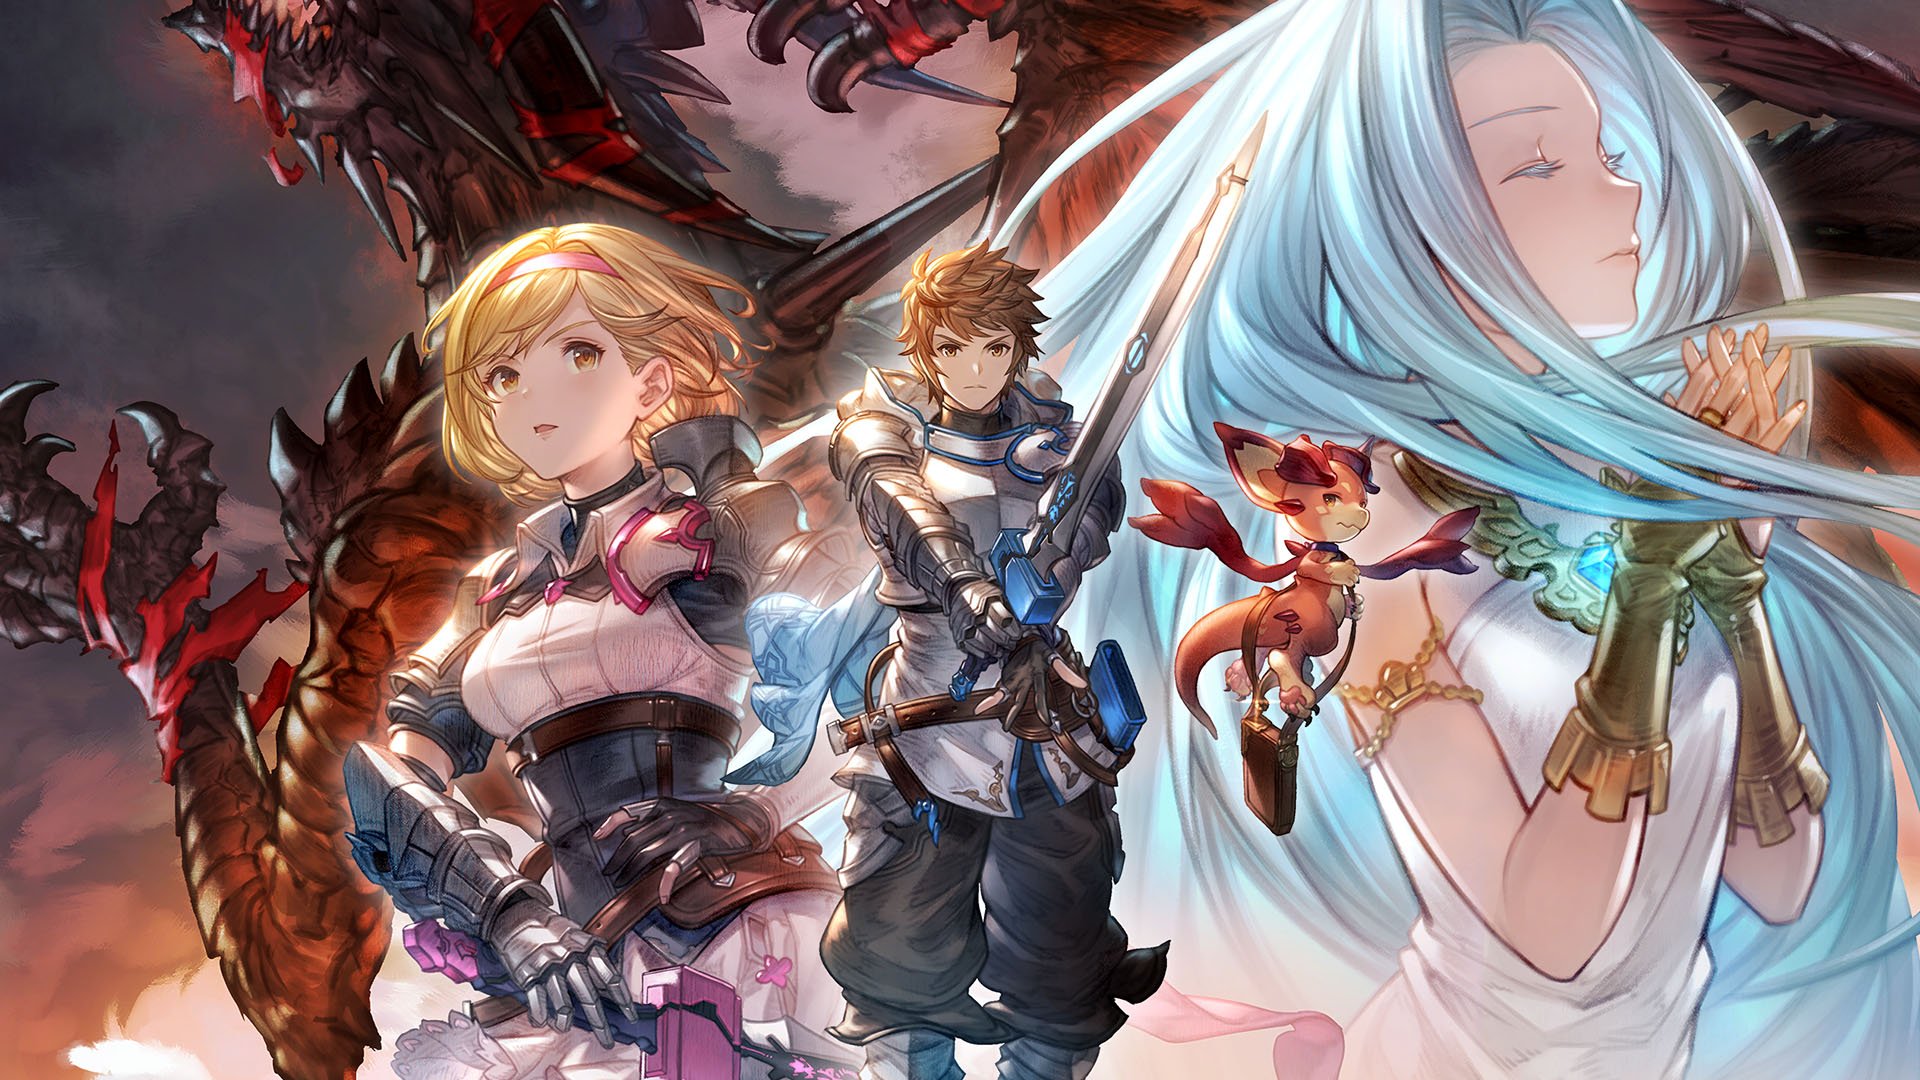 granblue fantasy relink switch